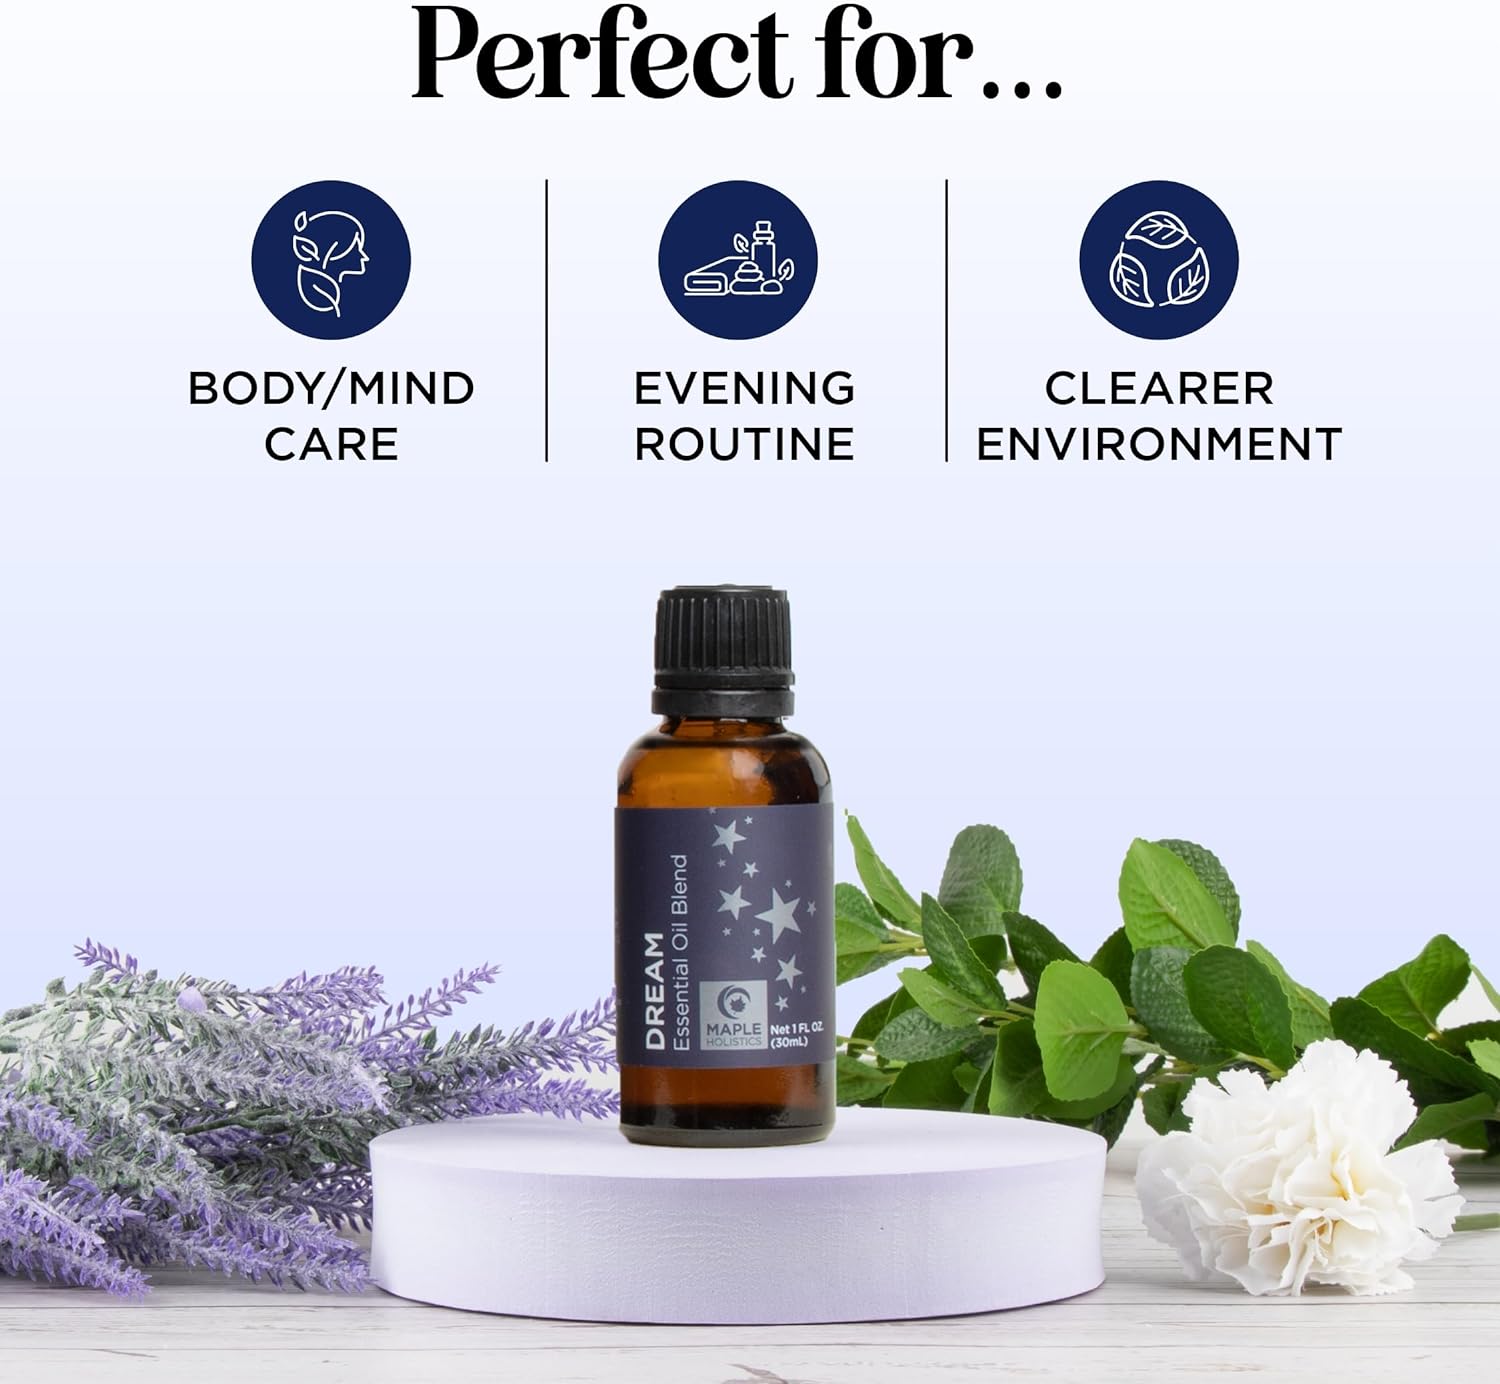 Sleep Essential Oil Blend for Diffuser